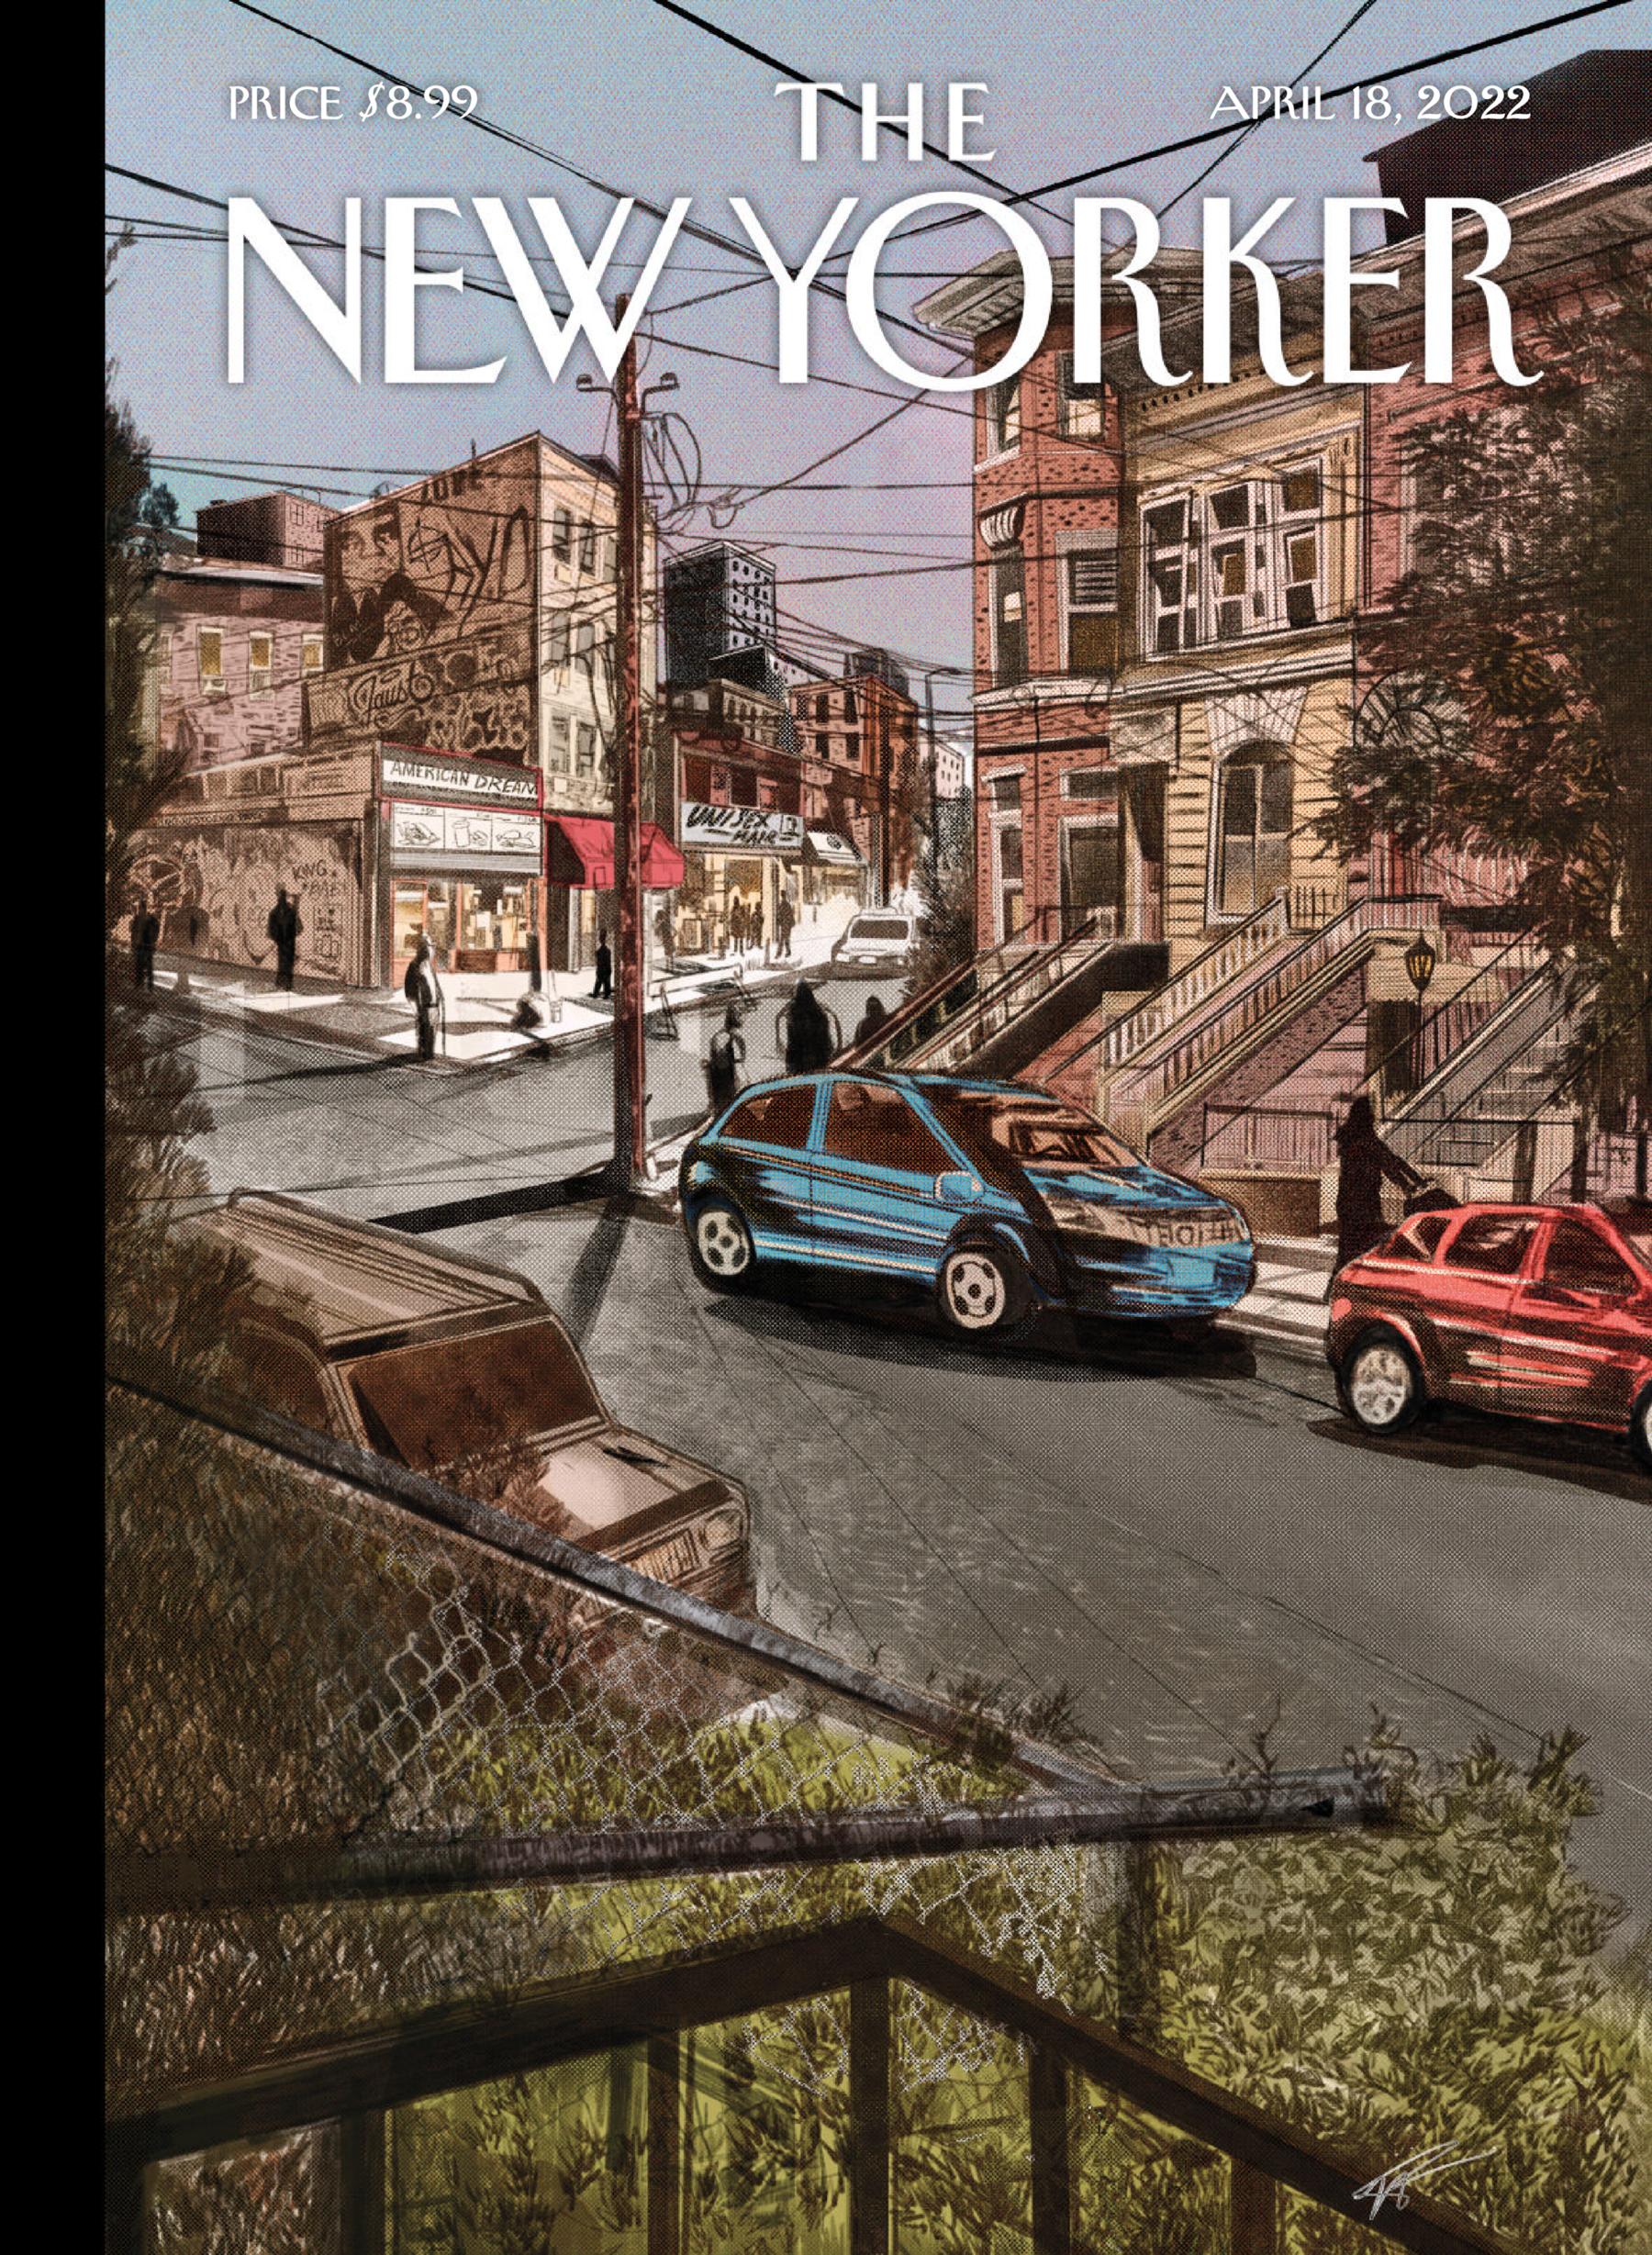 The New Yorker April 18, 2022 SoftArchive